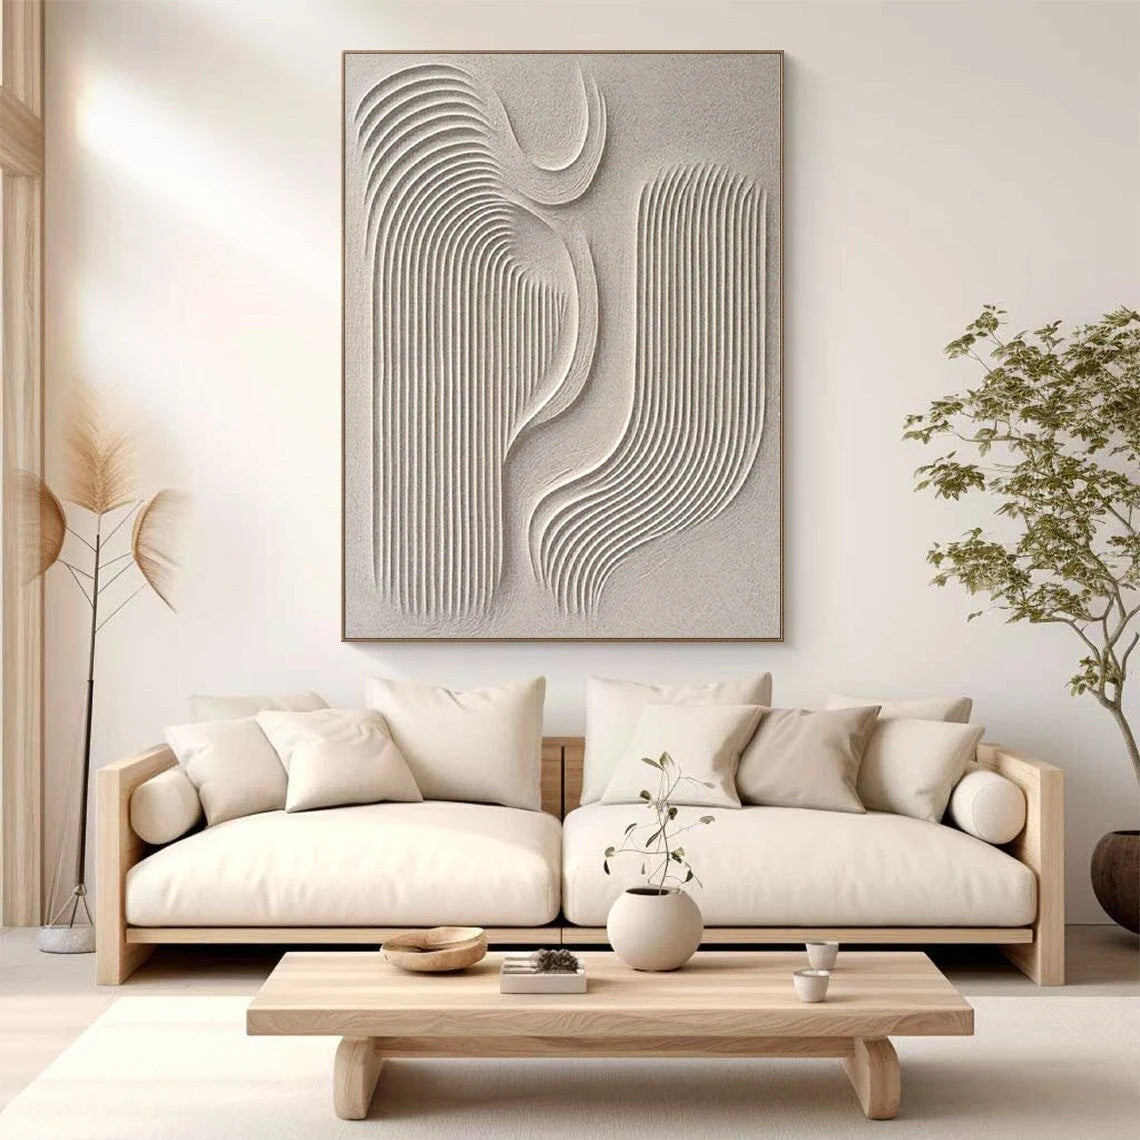 Textured Tranquility: A Customer’s Affection for Sculptural Art